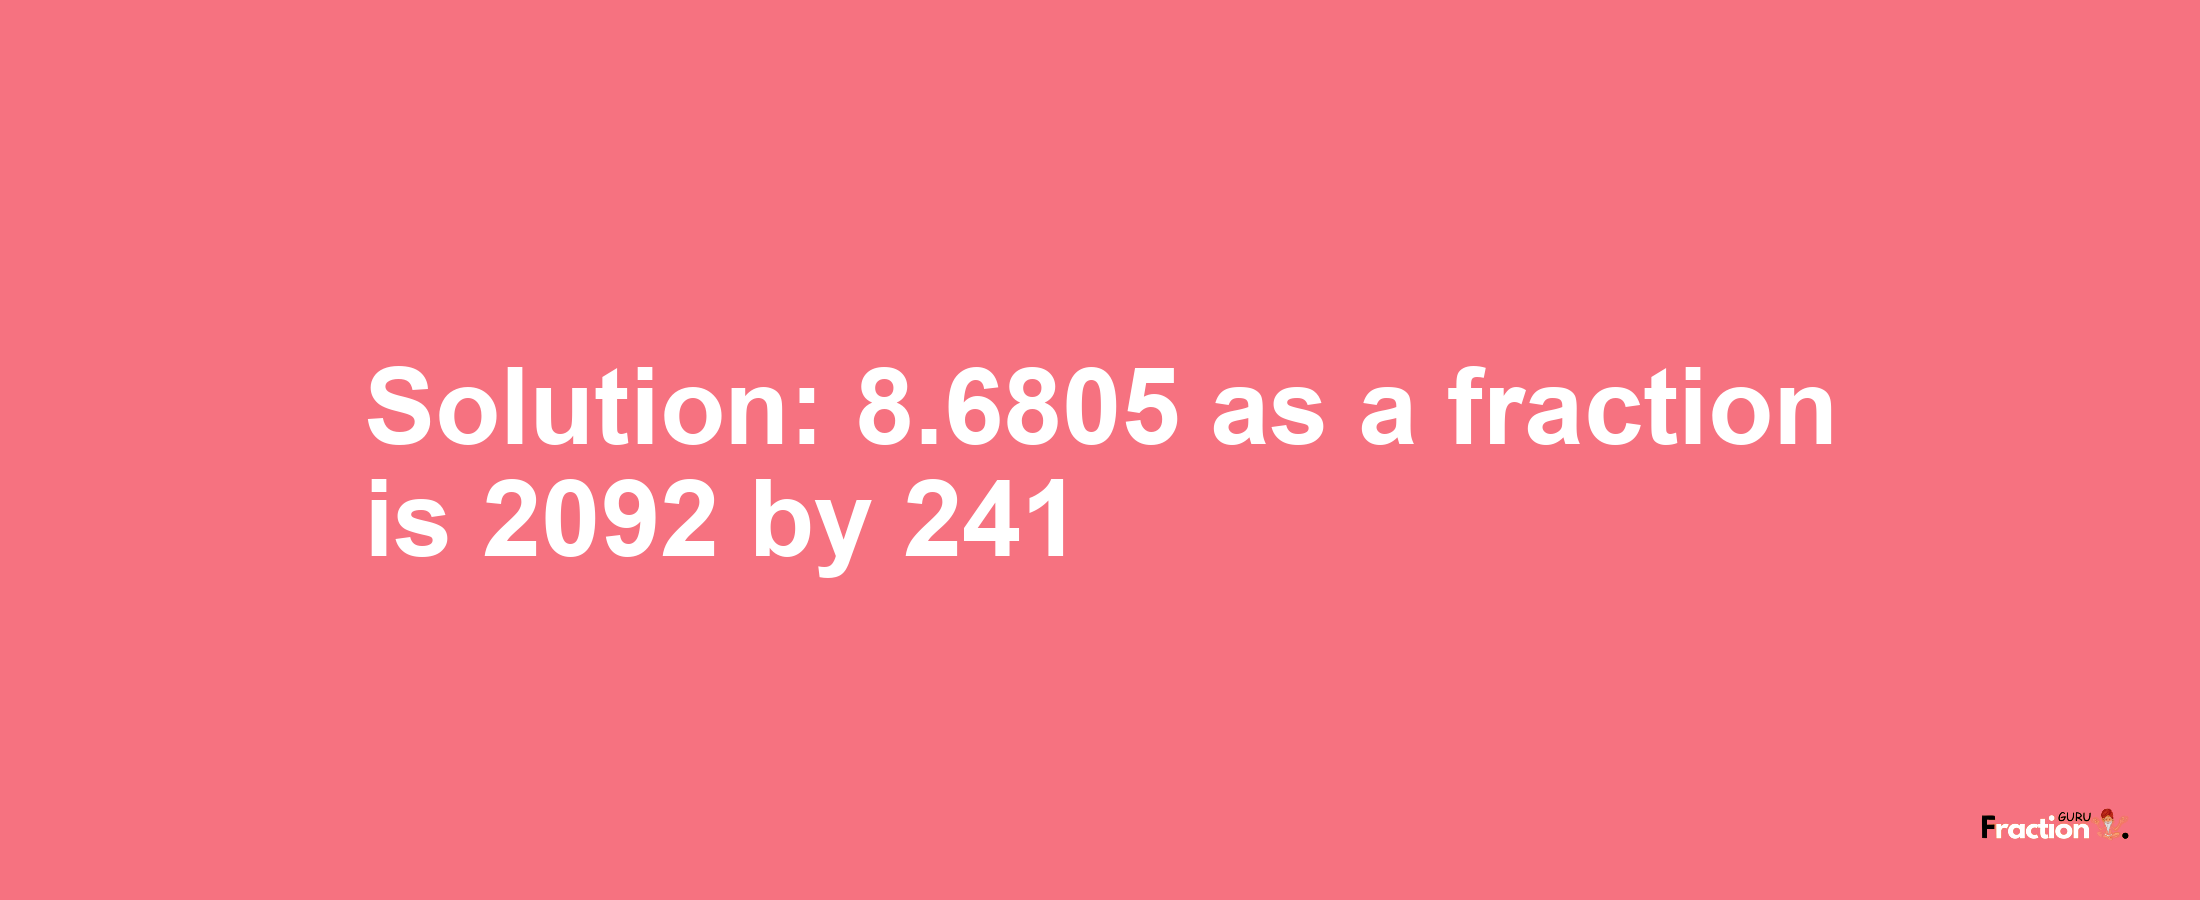 Solution:8.6805 as a fraction is 2092/241